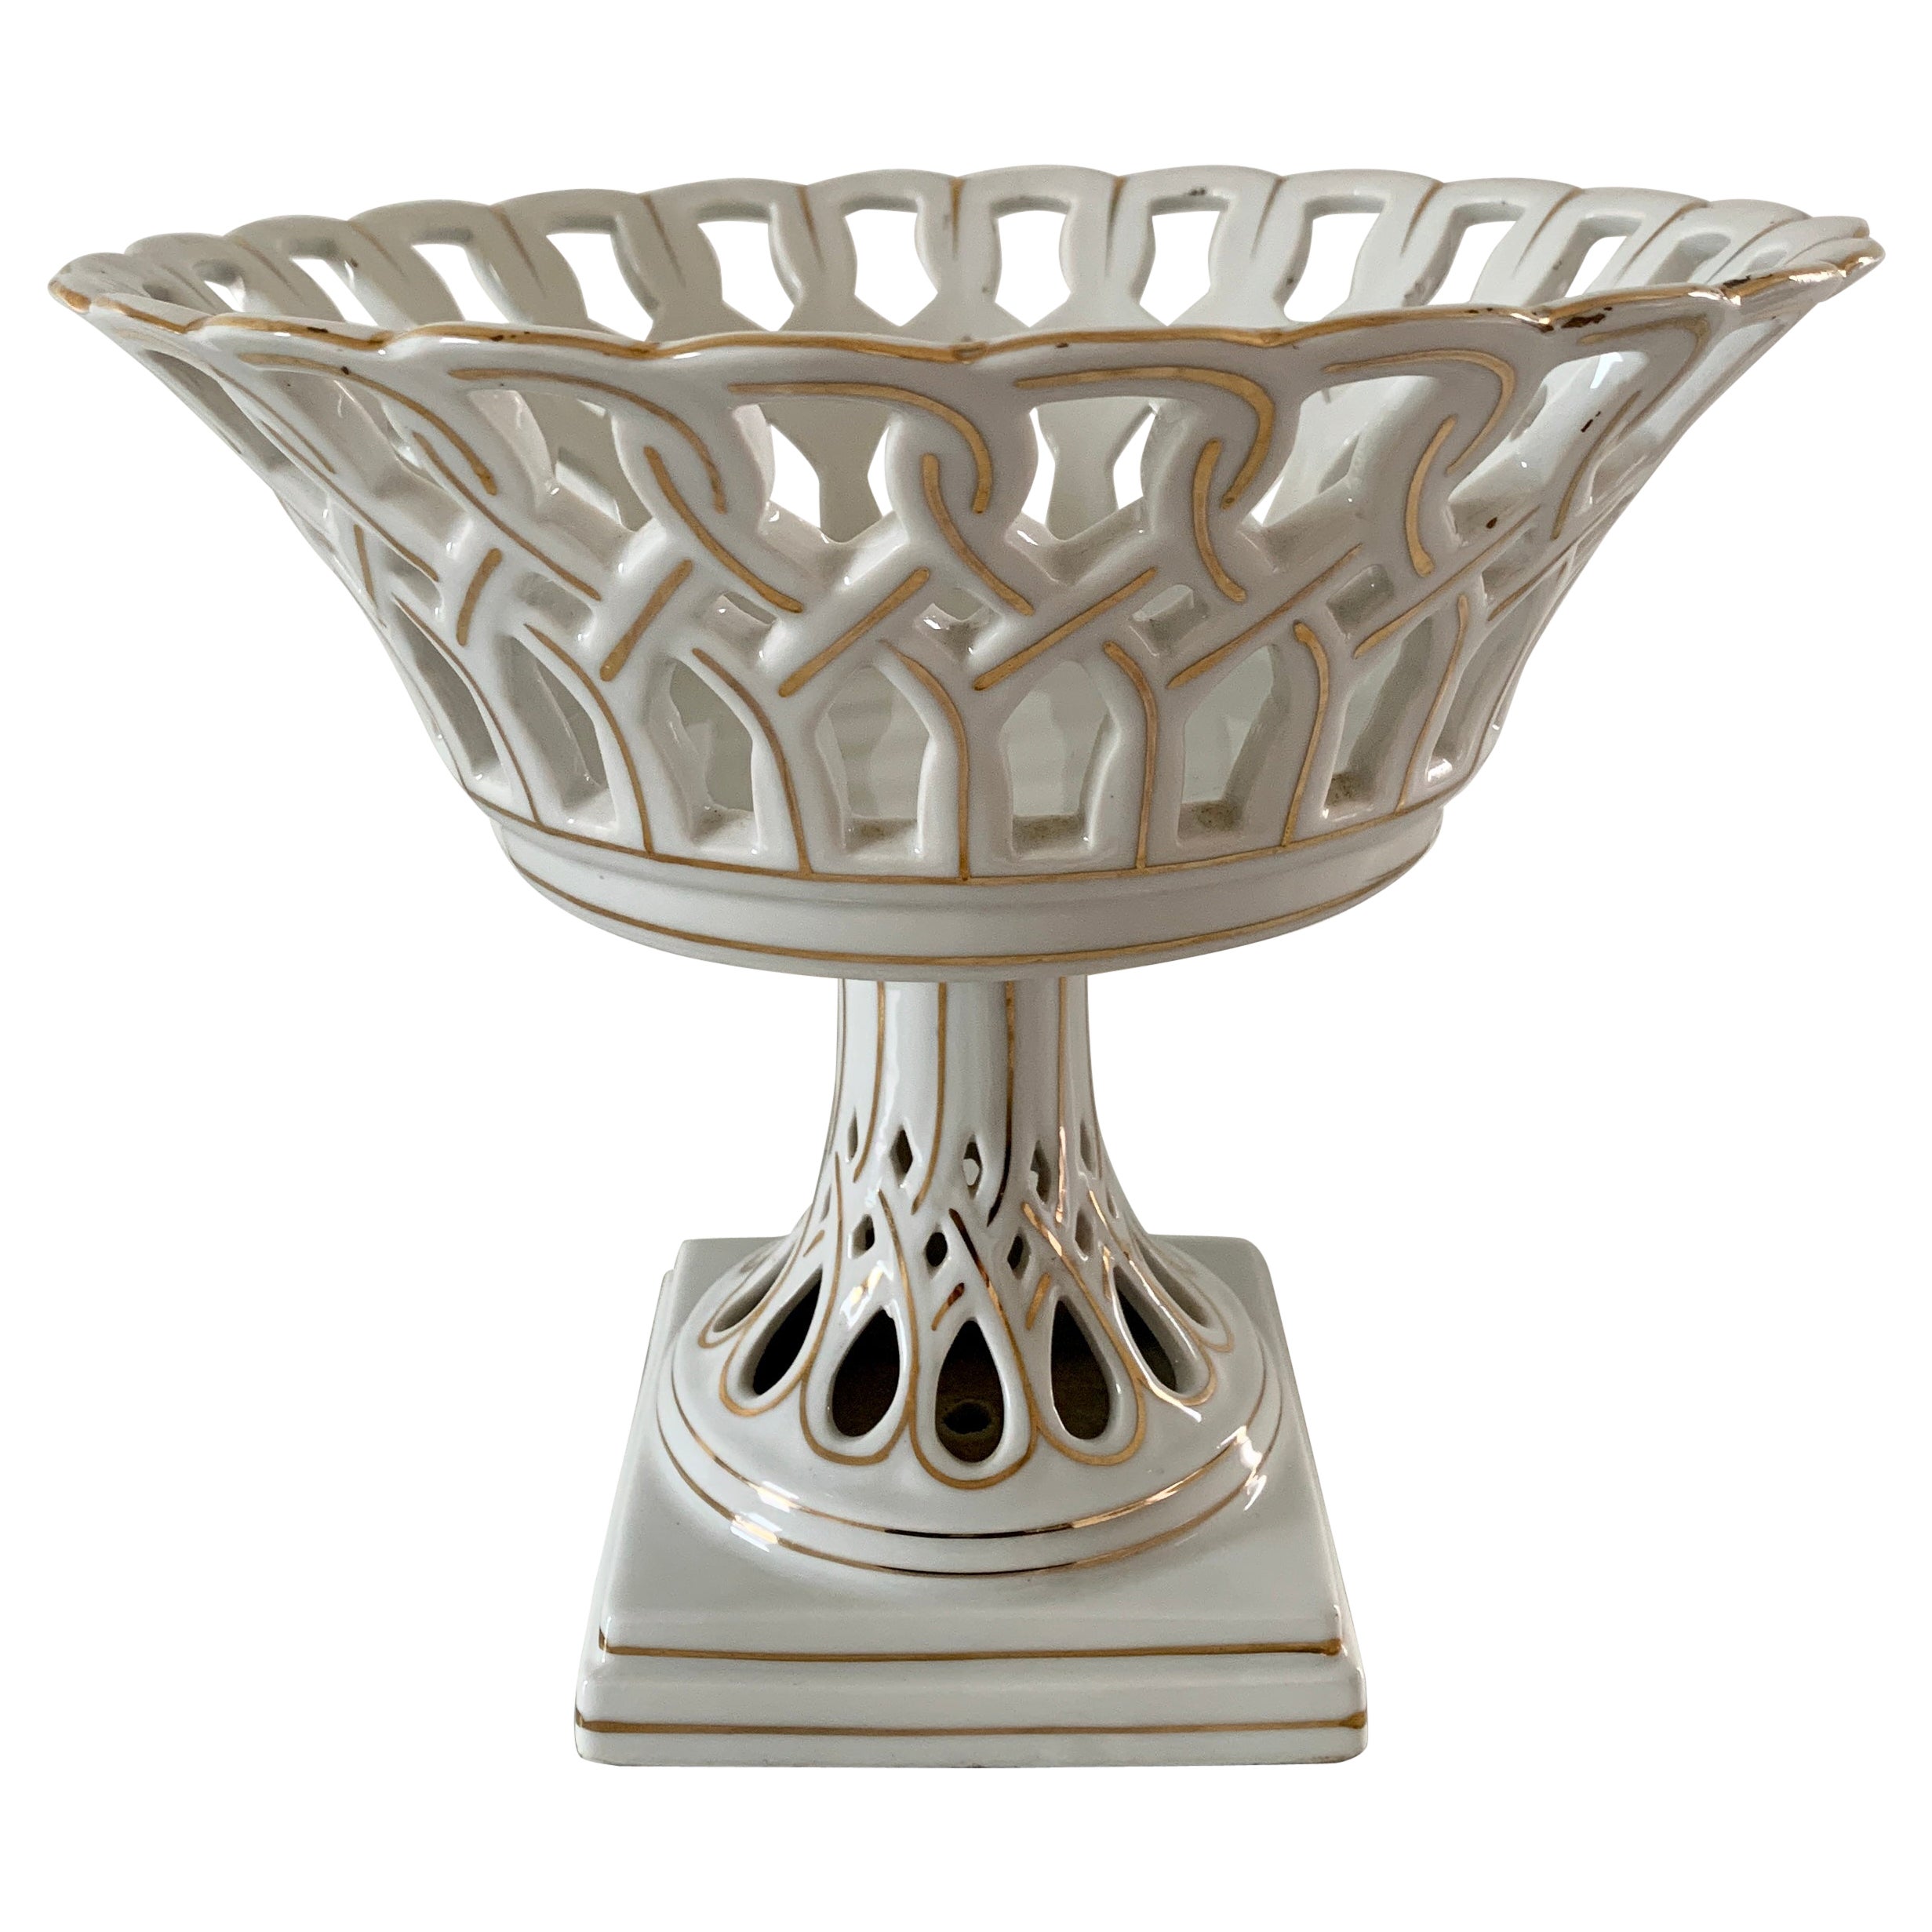 Reticulated White Porcelain and Gold Gilt Basket Compote